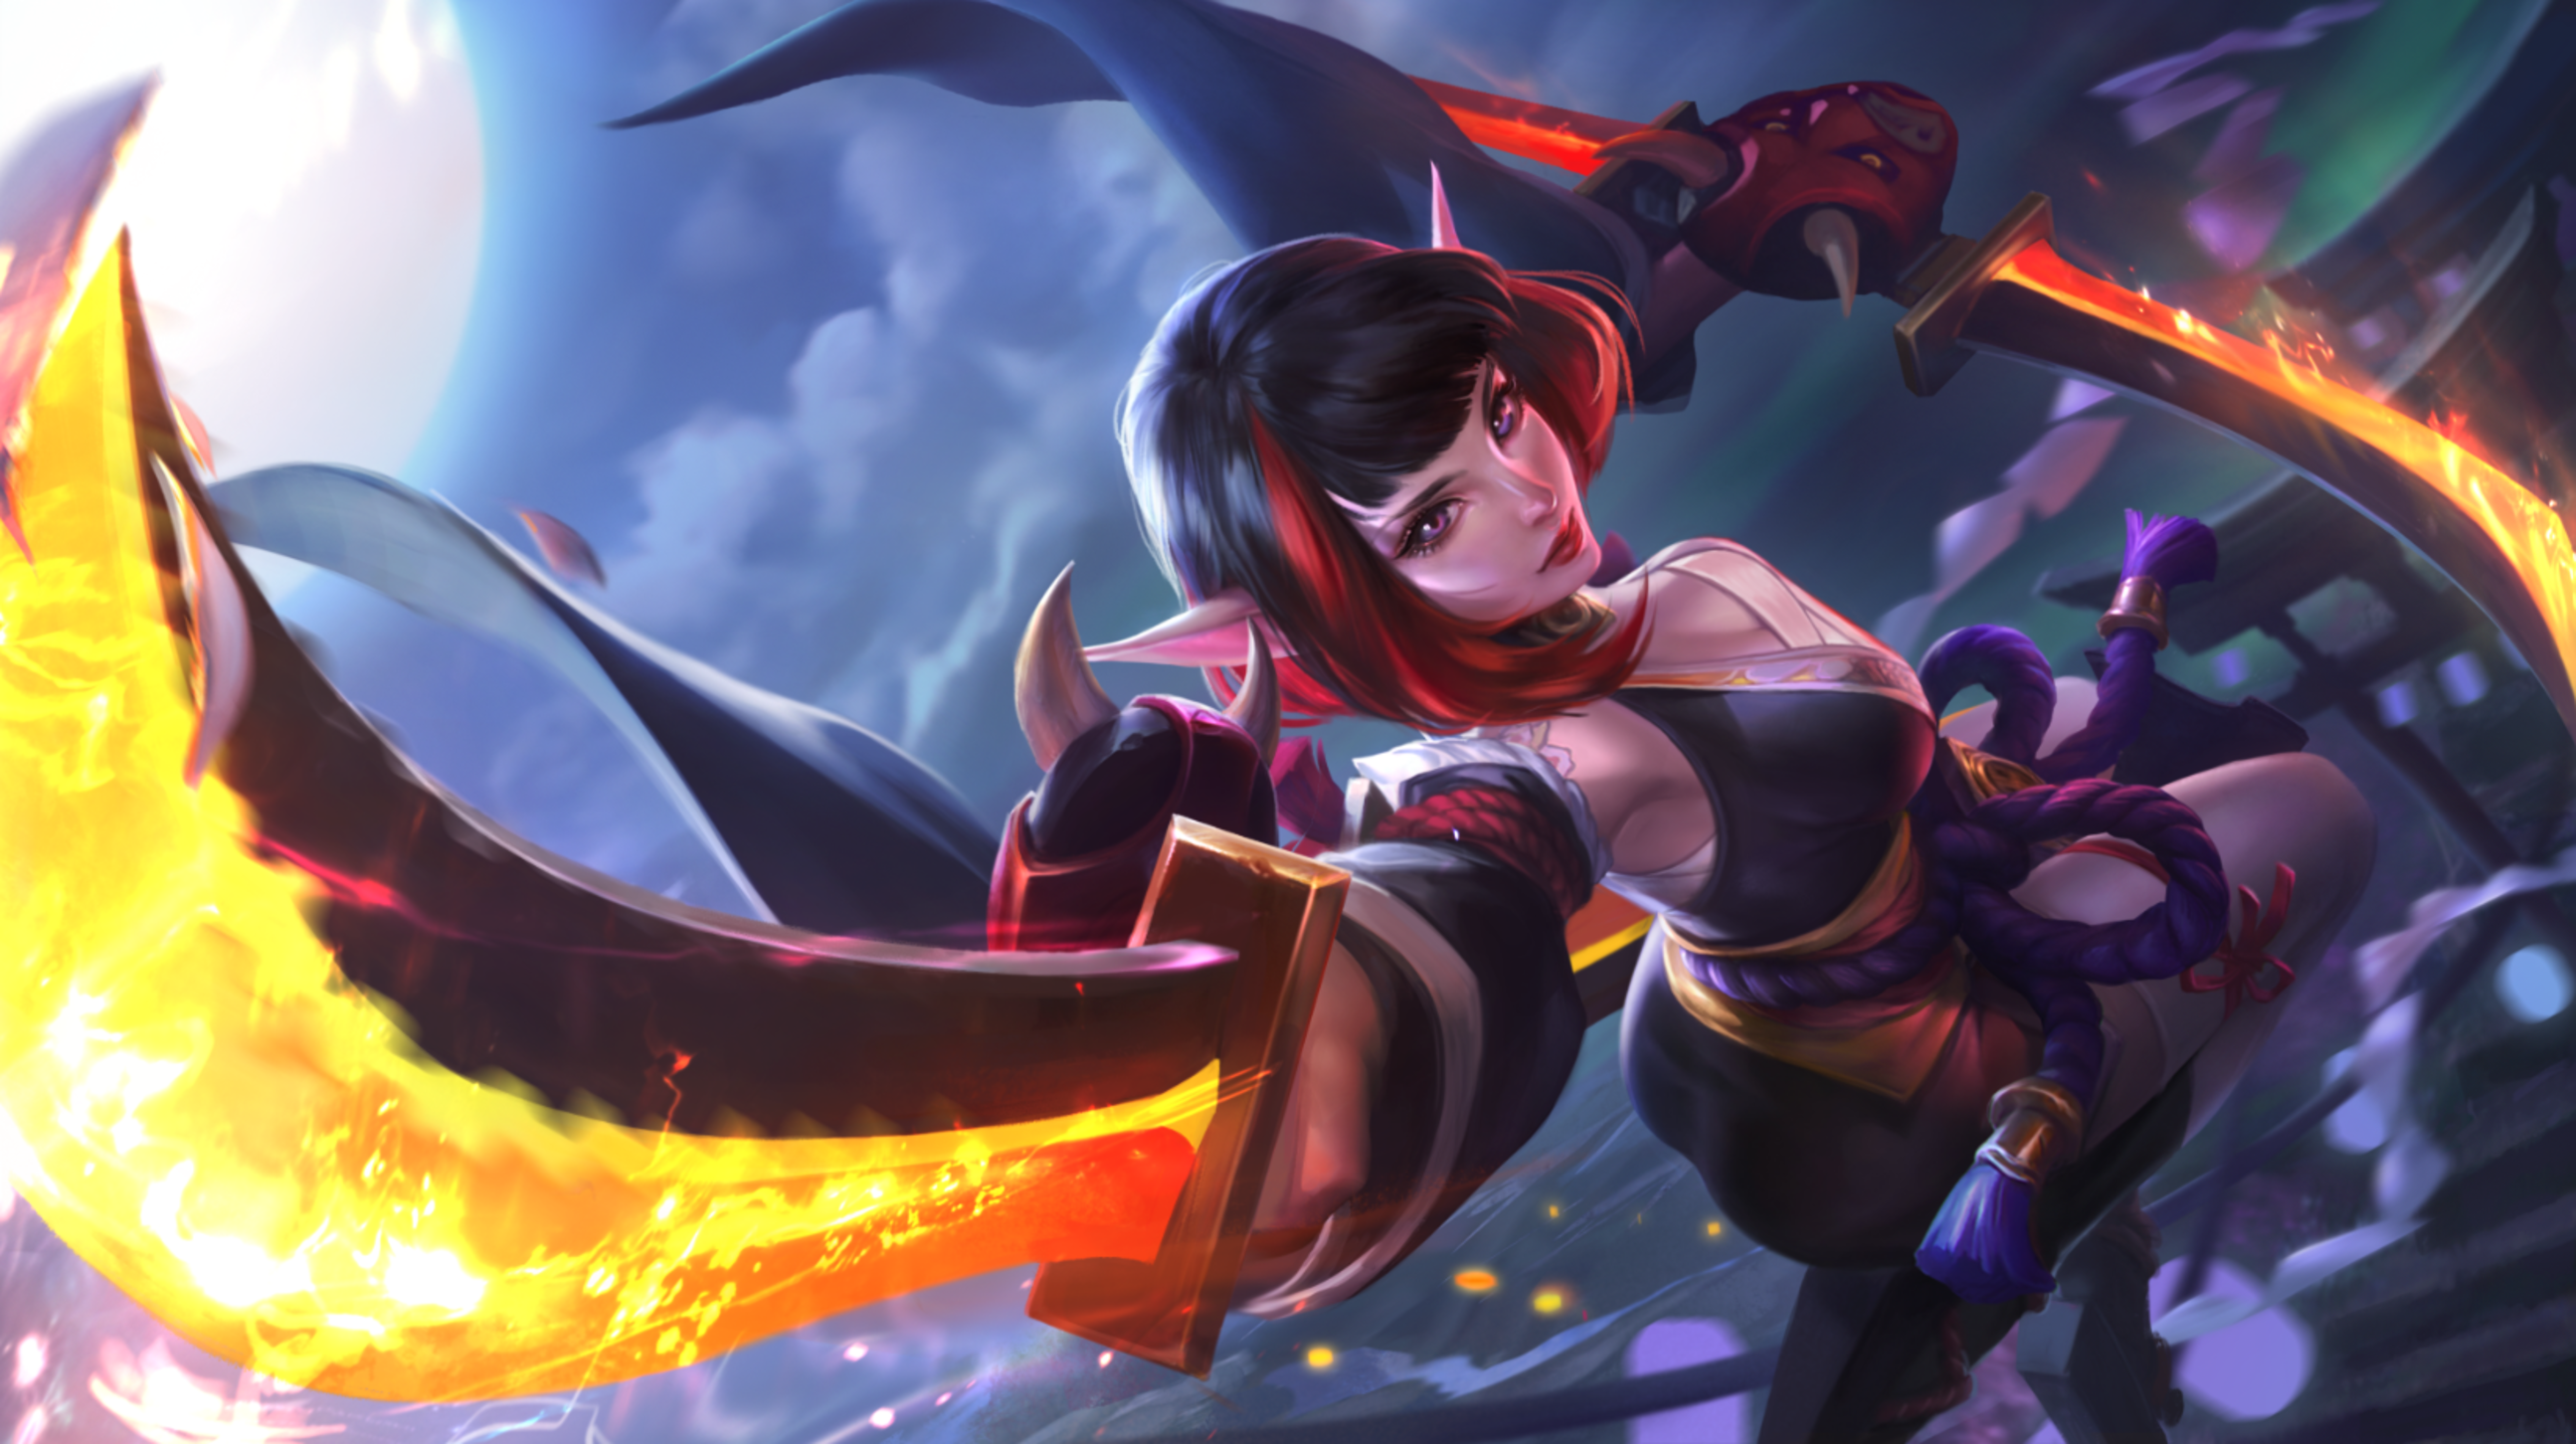 110+ Mobile Legends: Bang Bang HD Wallpapers and Backgrounds